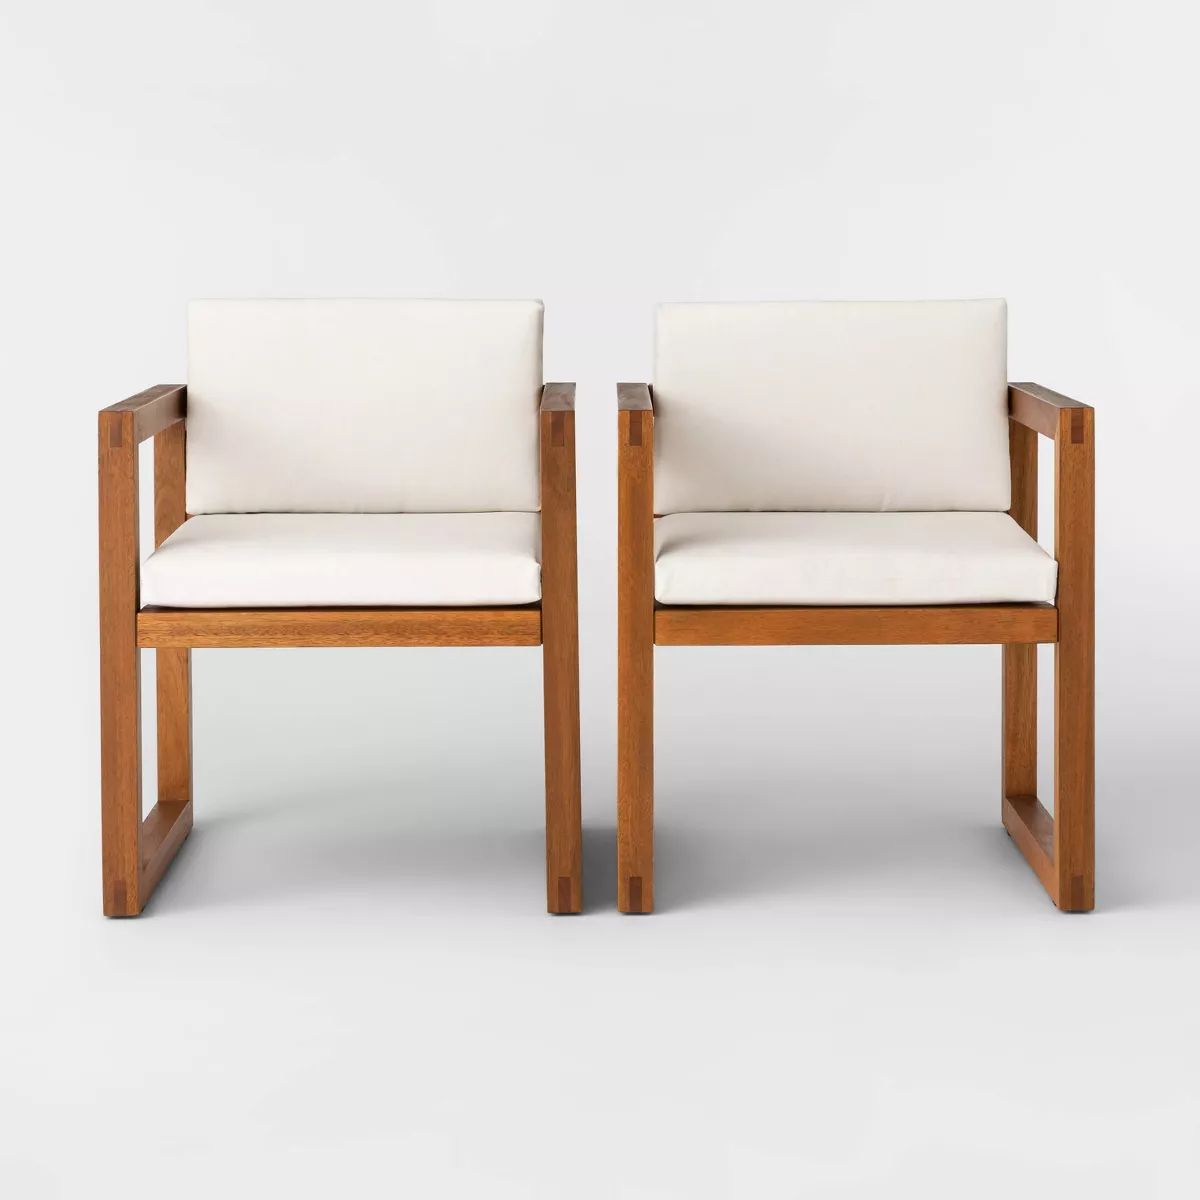 Kaufmann 2pk Wood Patio Arm Chairs - Natural - Project 62™ | Target